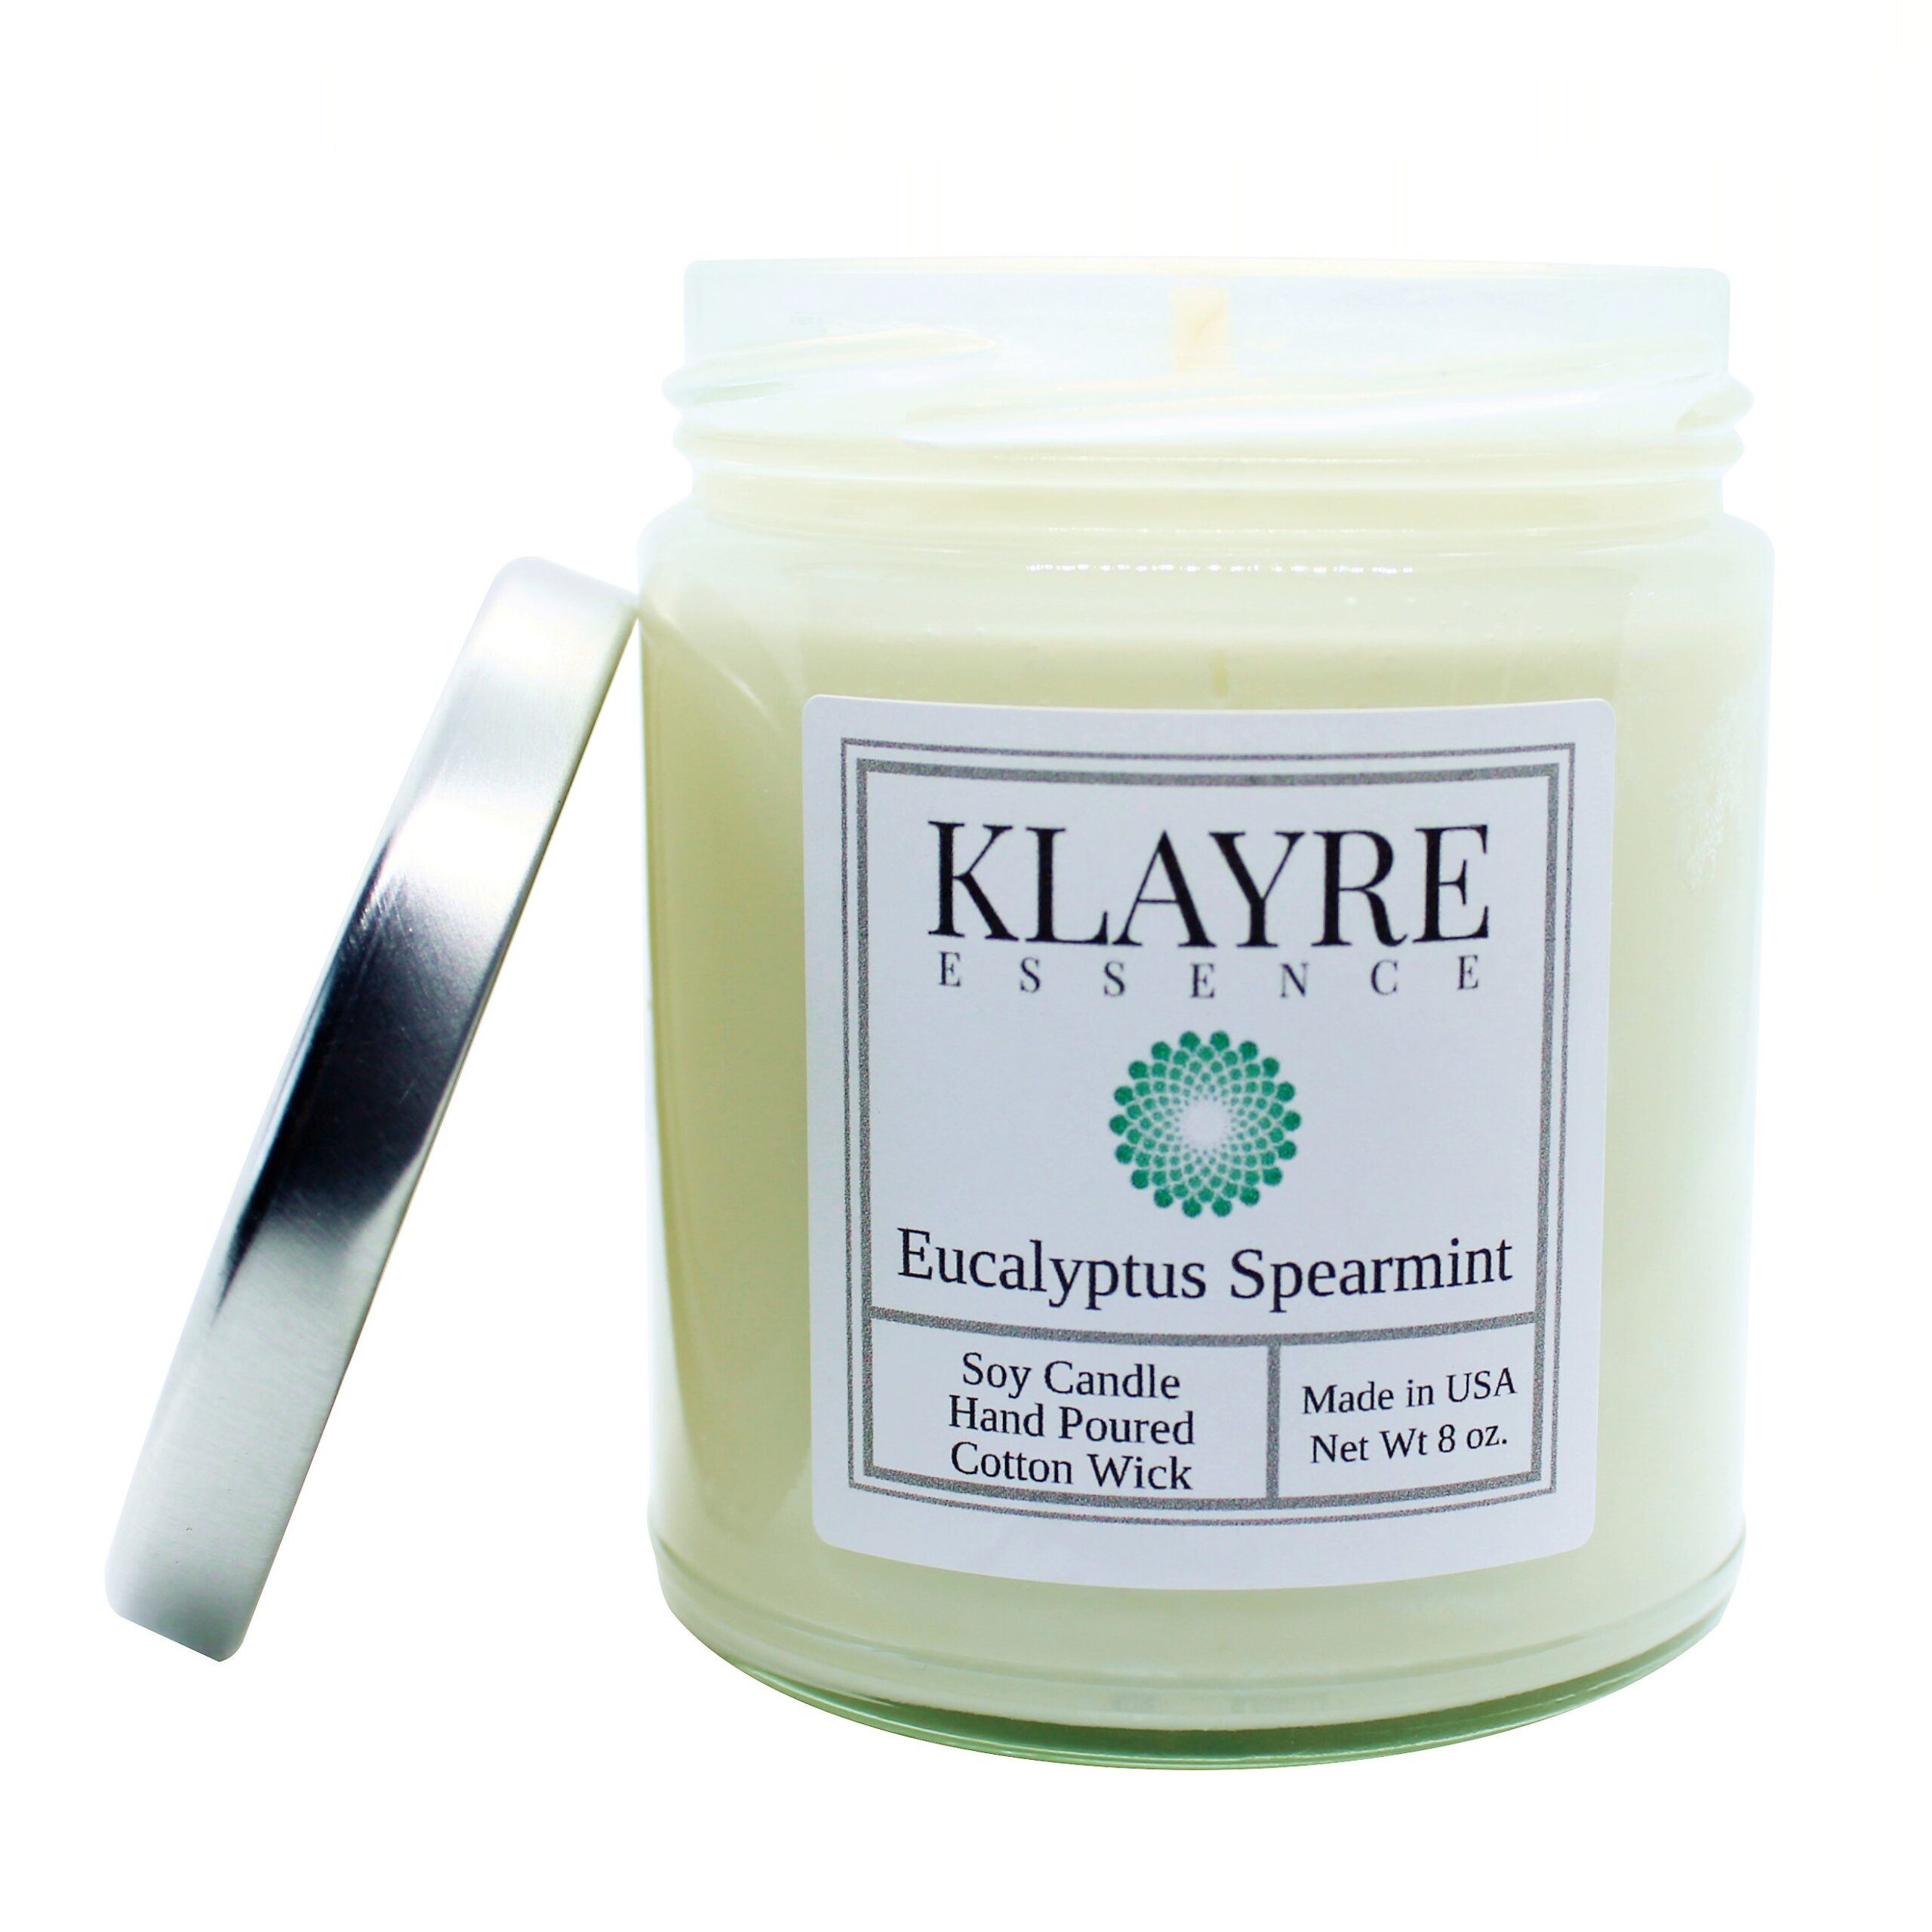 Relax 8 oz Hand Poured Soy Wax Candle Eucalyptus Spearmint